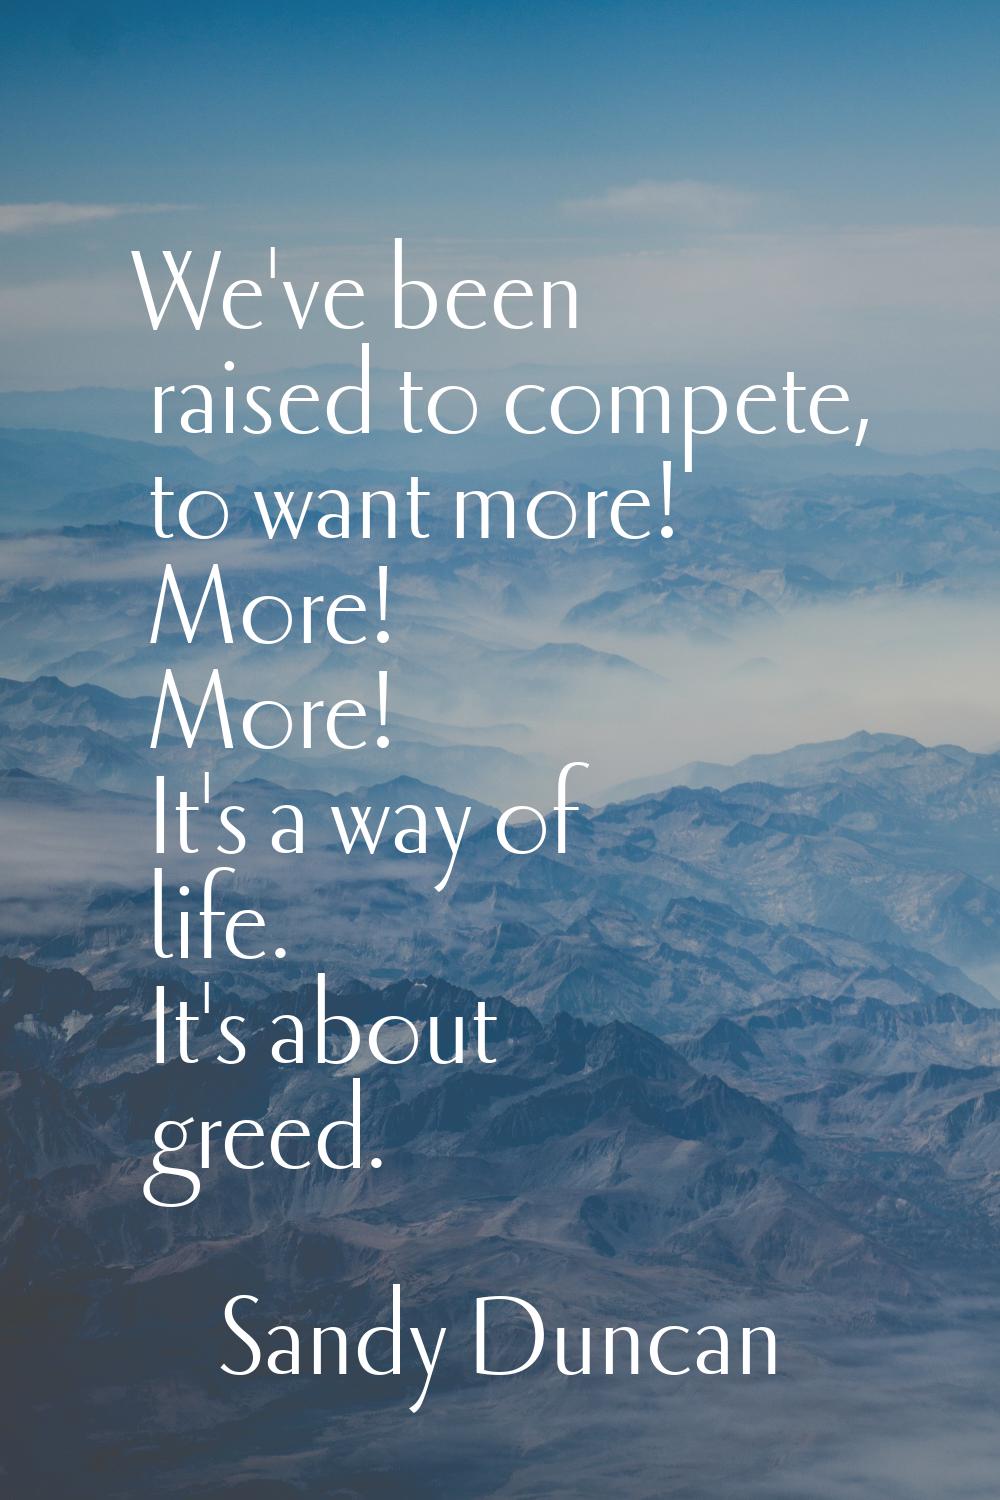 We've been raised to compete, to want more! More! More! It's a way of life. It's about greed.